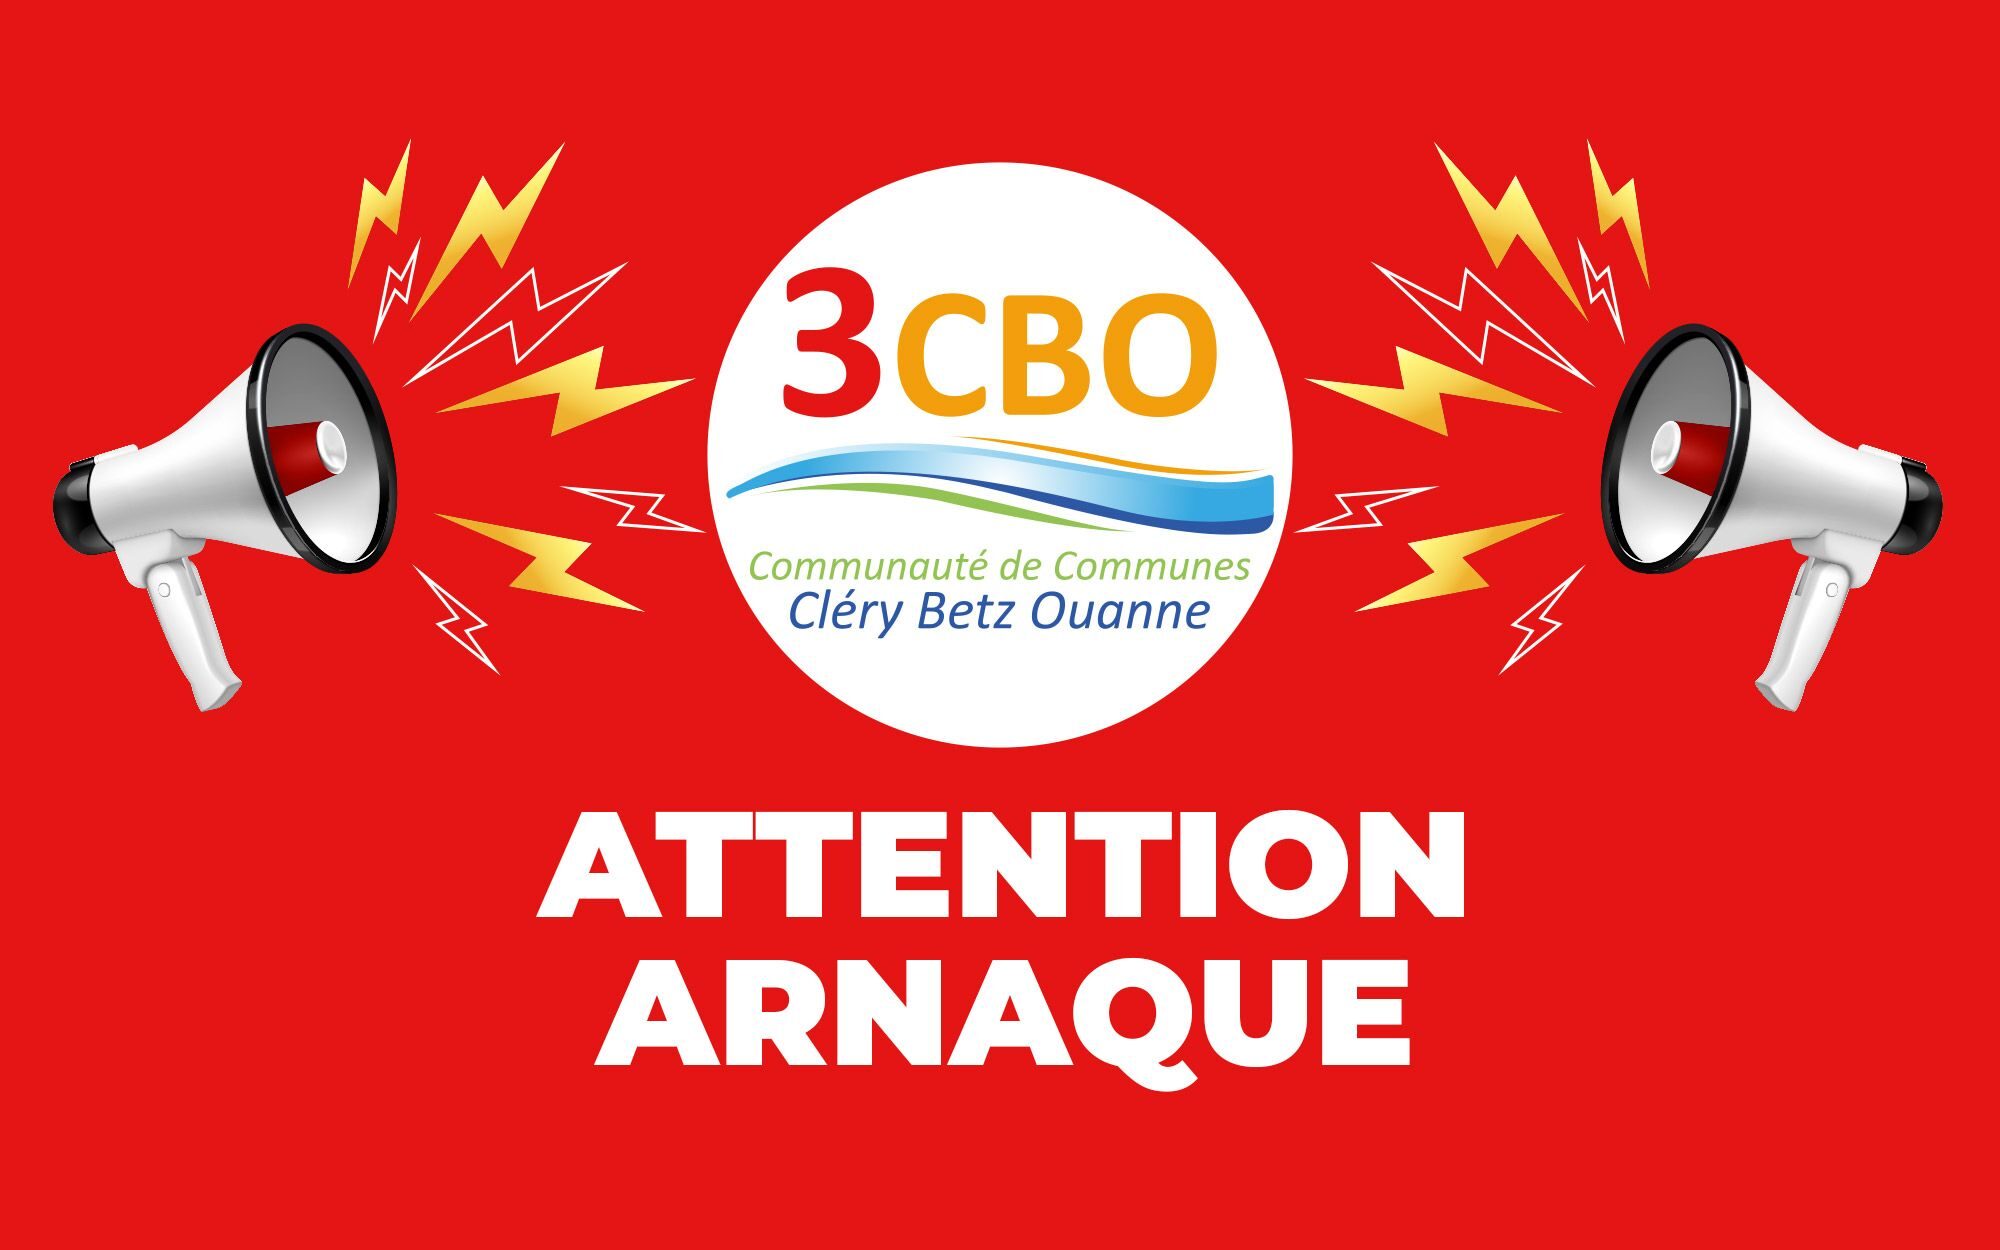 ATTENTION ARNAQUE 3CBO